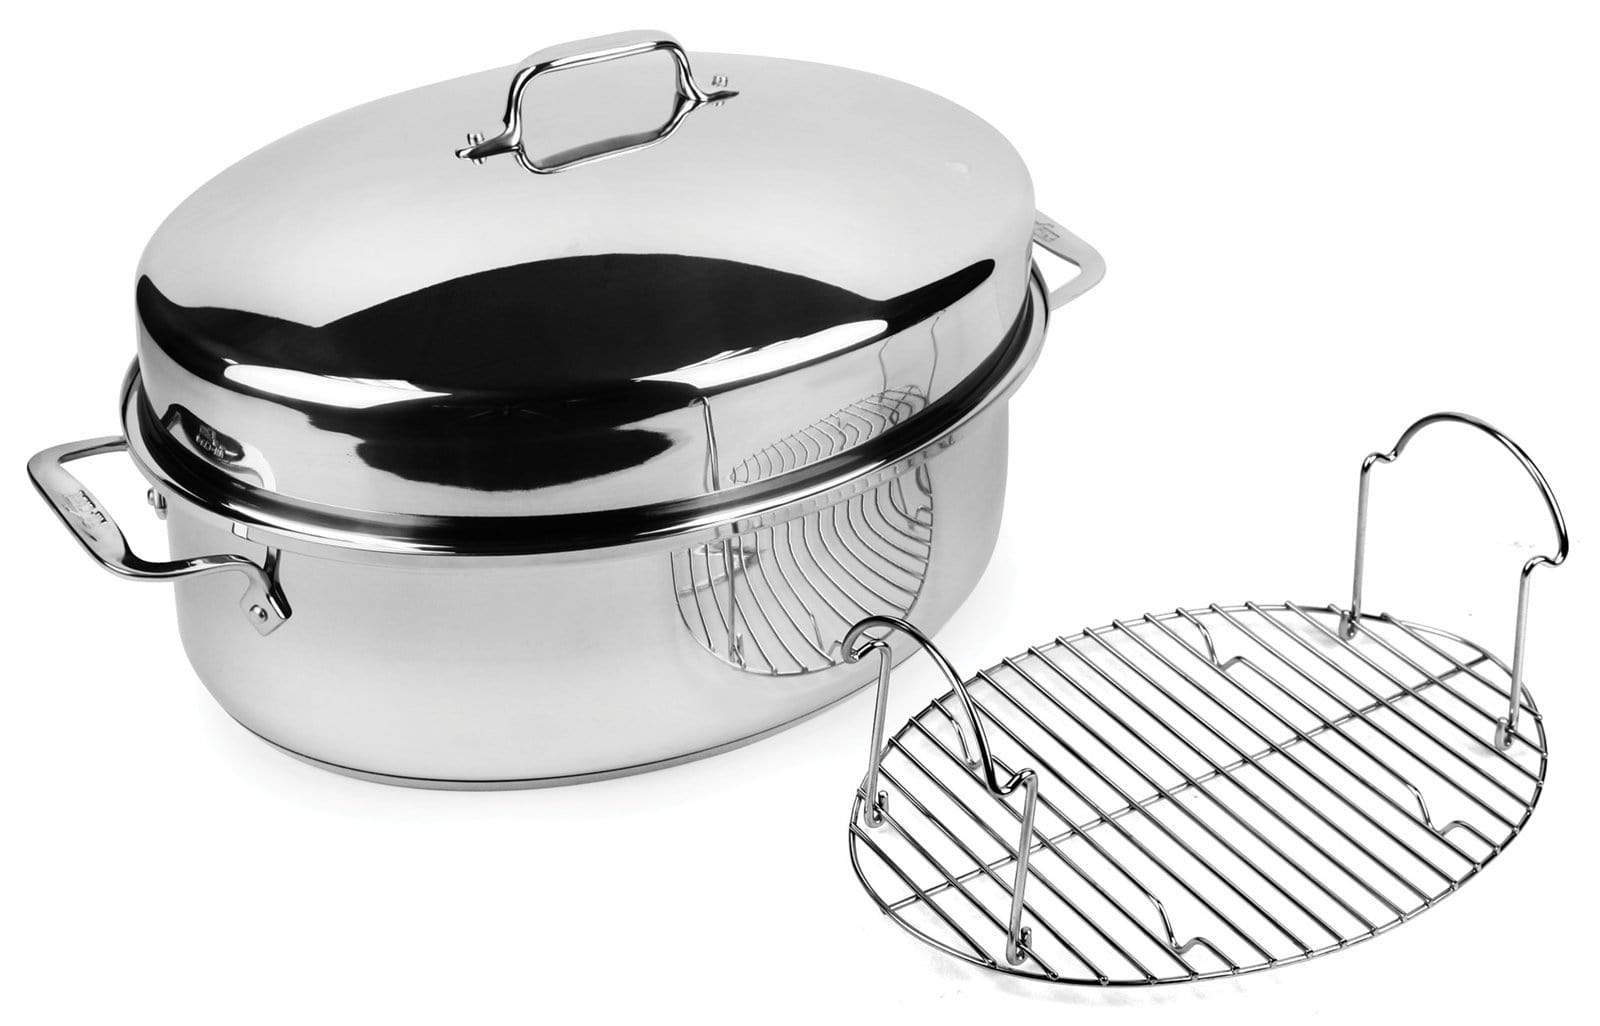 All-Clad Roaster All-Clad Stainless Steel Covered Oval Roaster with Rack